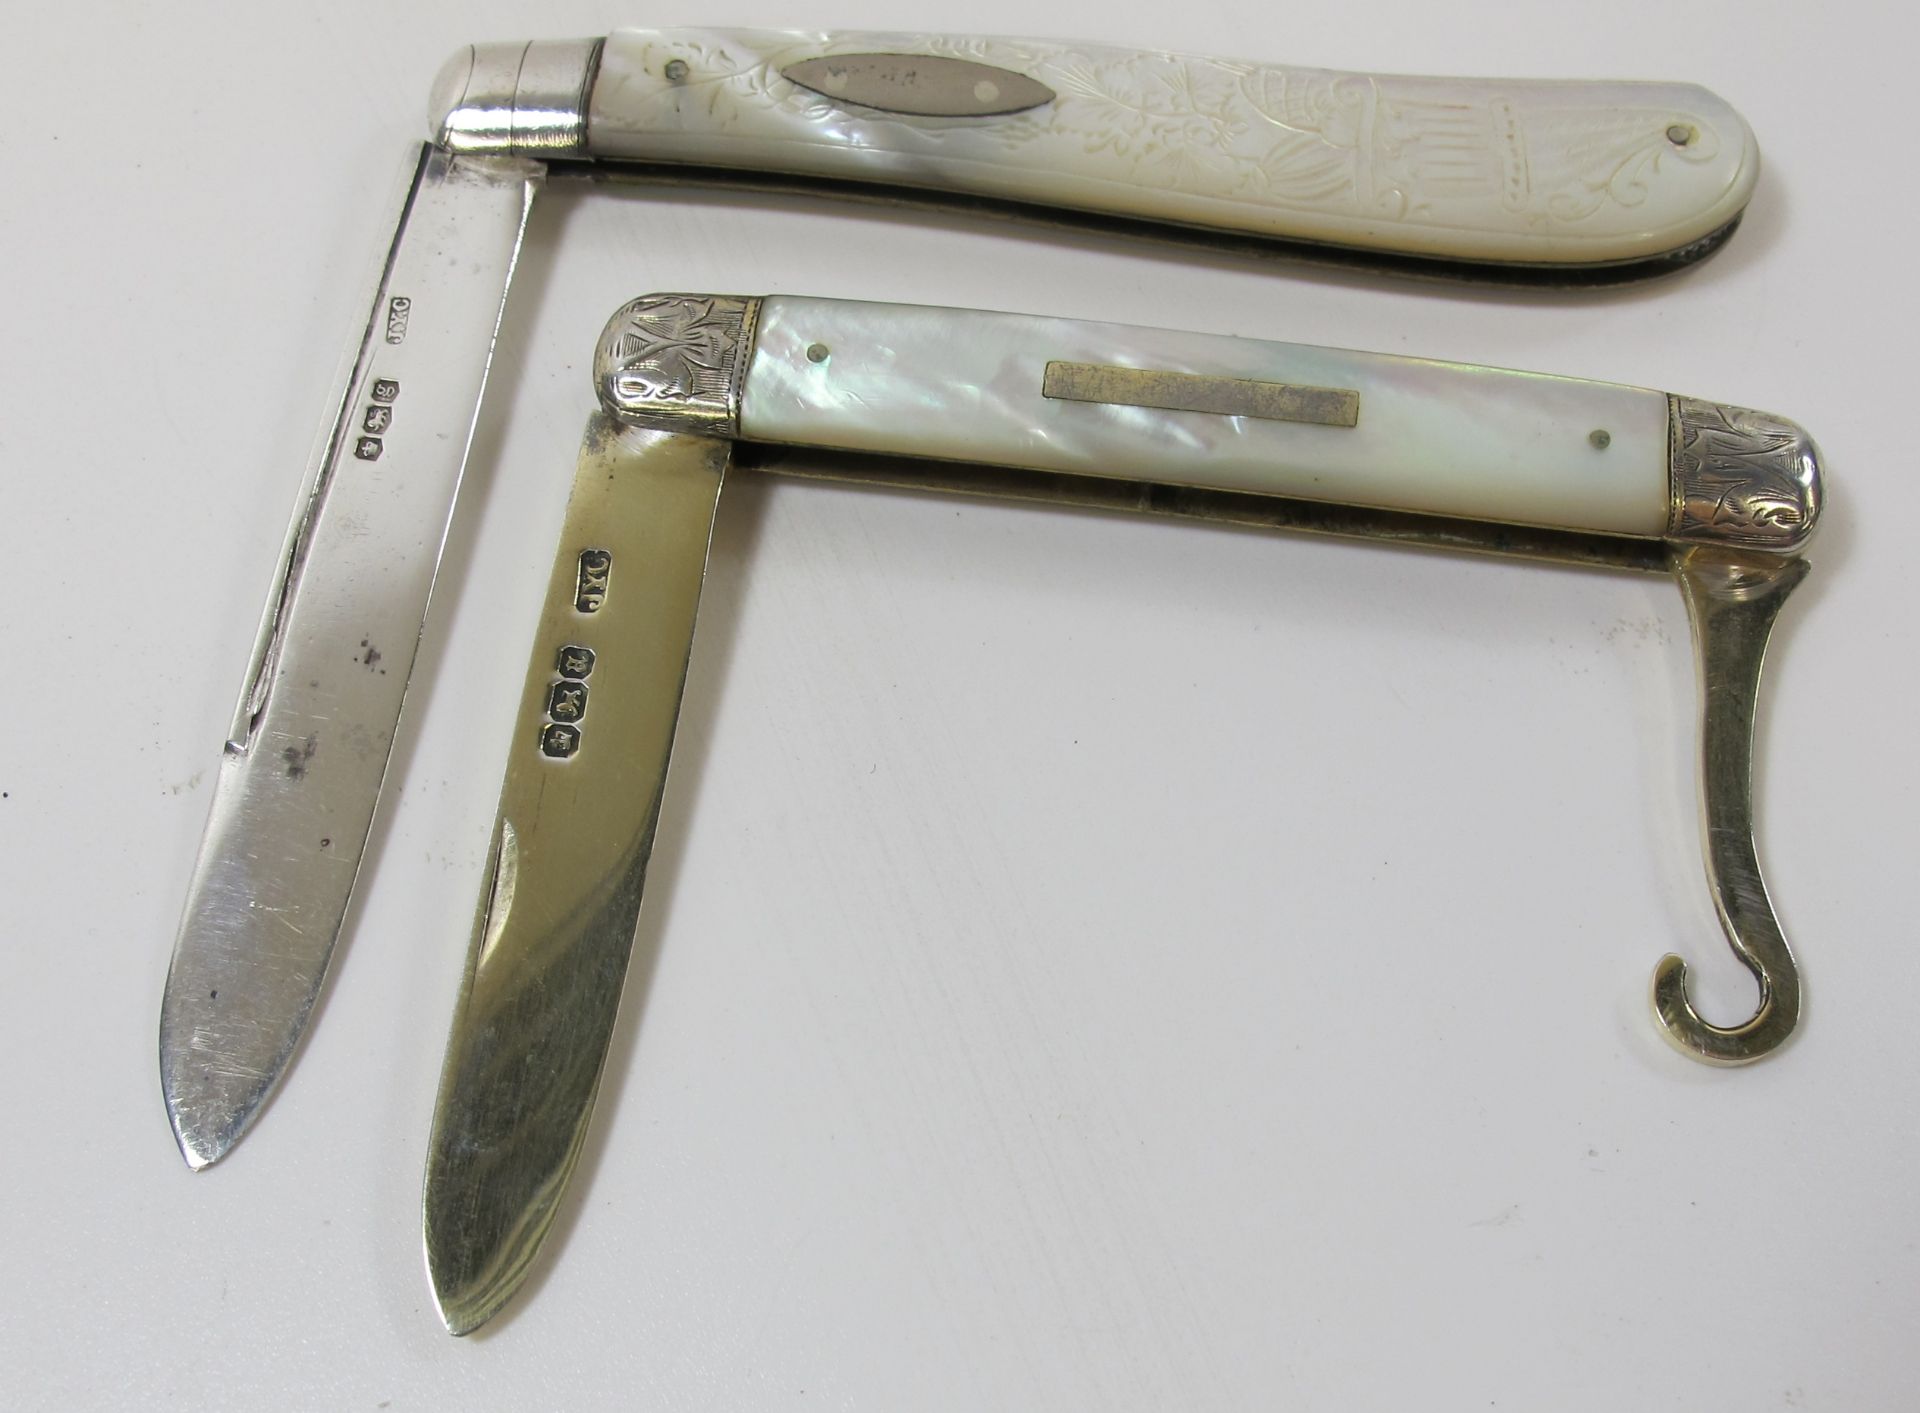 Two Mother of Pearl Body and Silver Blade Folding Fruit Knives, Sheffield 1893 and 1924 (est £30-£